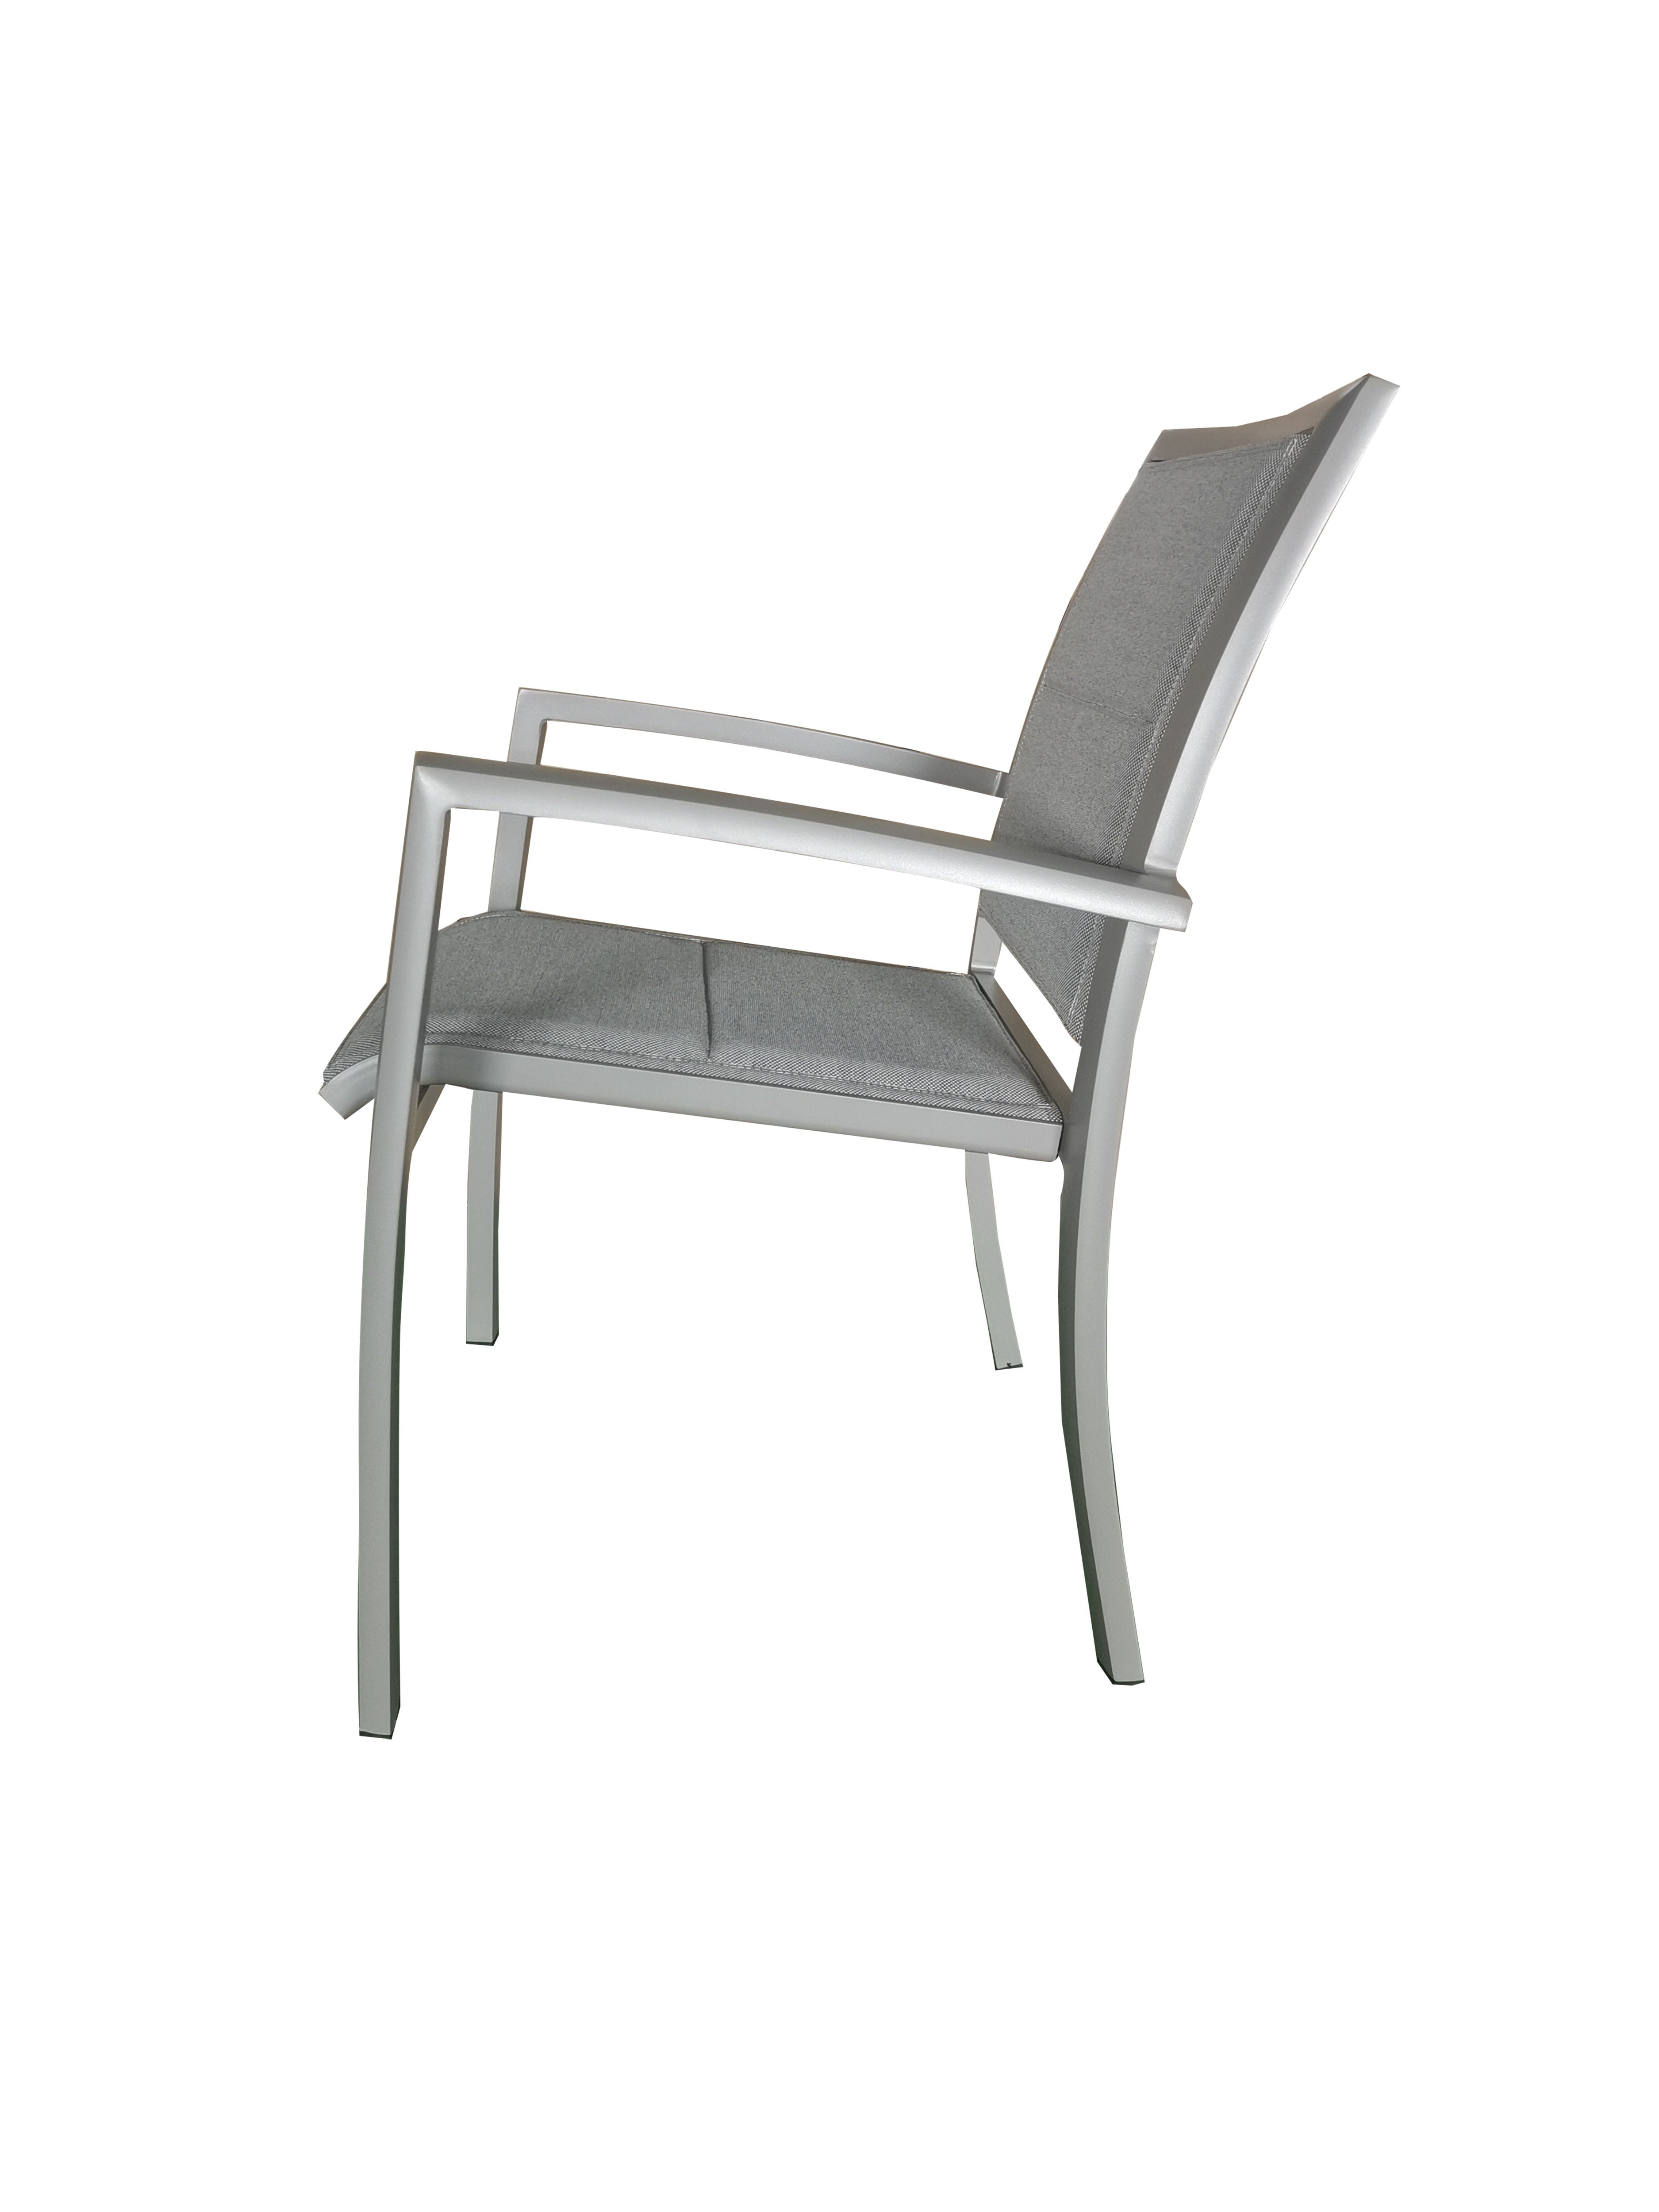 MOSS MOSS-T316TMA - Akumal Collection, Taupe matte aluminum stackable chair with quick dry padded taupe mix textilene seat 24" x 31" x H 36"